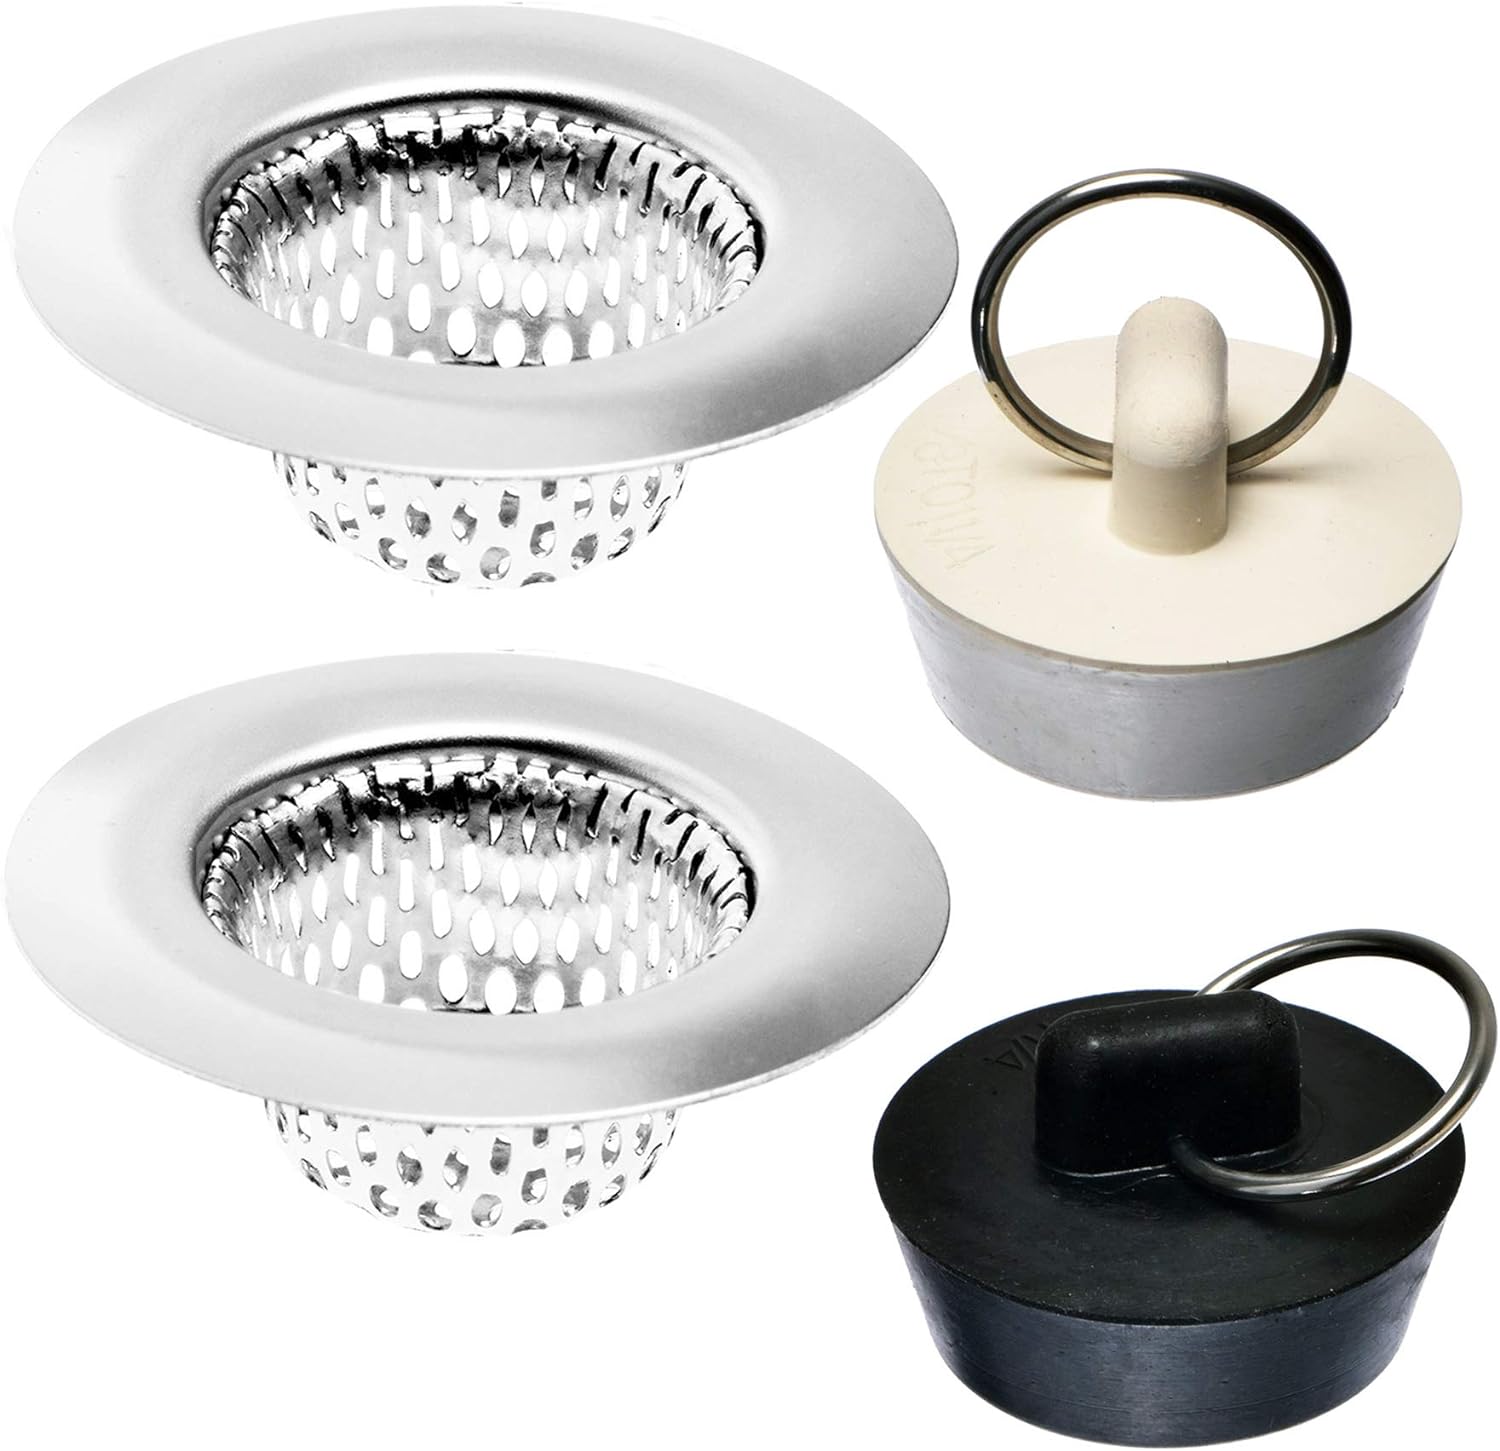 Hilltop Products Inc 4 Pack - Bathroom Sink Strainers and Stopper Plug Combo - 2.125" Top / 1" Basket, Stainless Steel Strainers and Rubbe